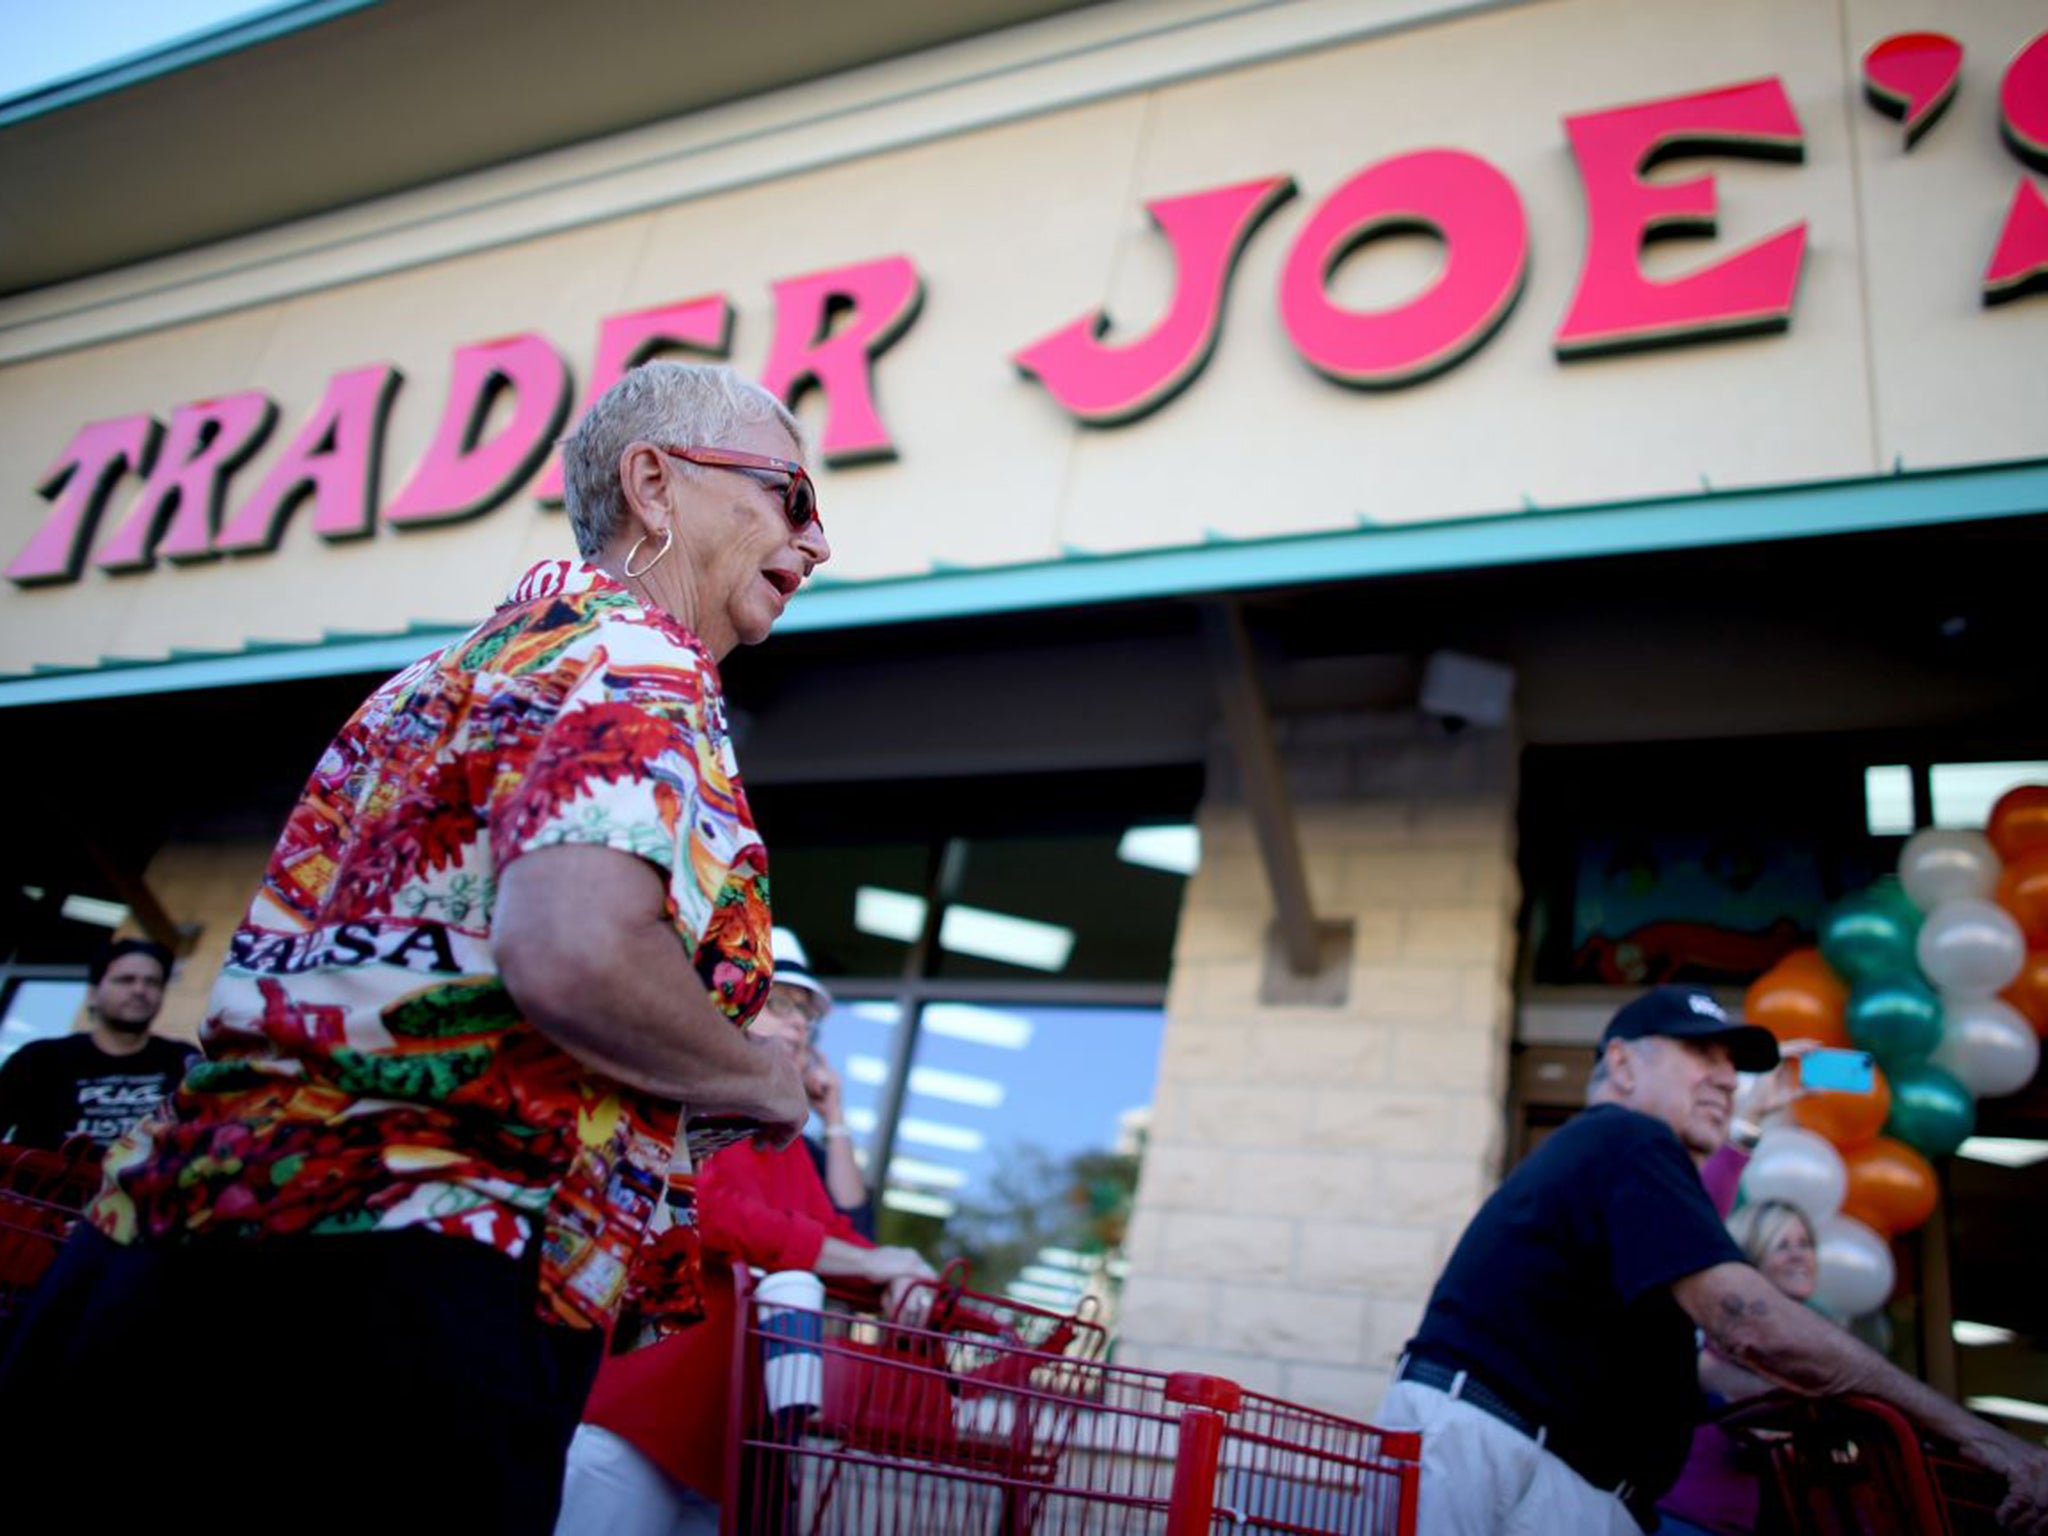 The low-cost organic grocer Trader Joe’s will provide direct competition